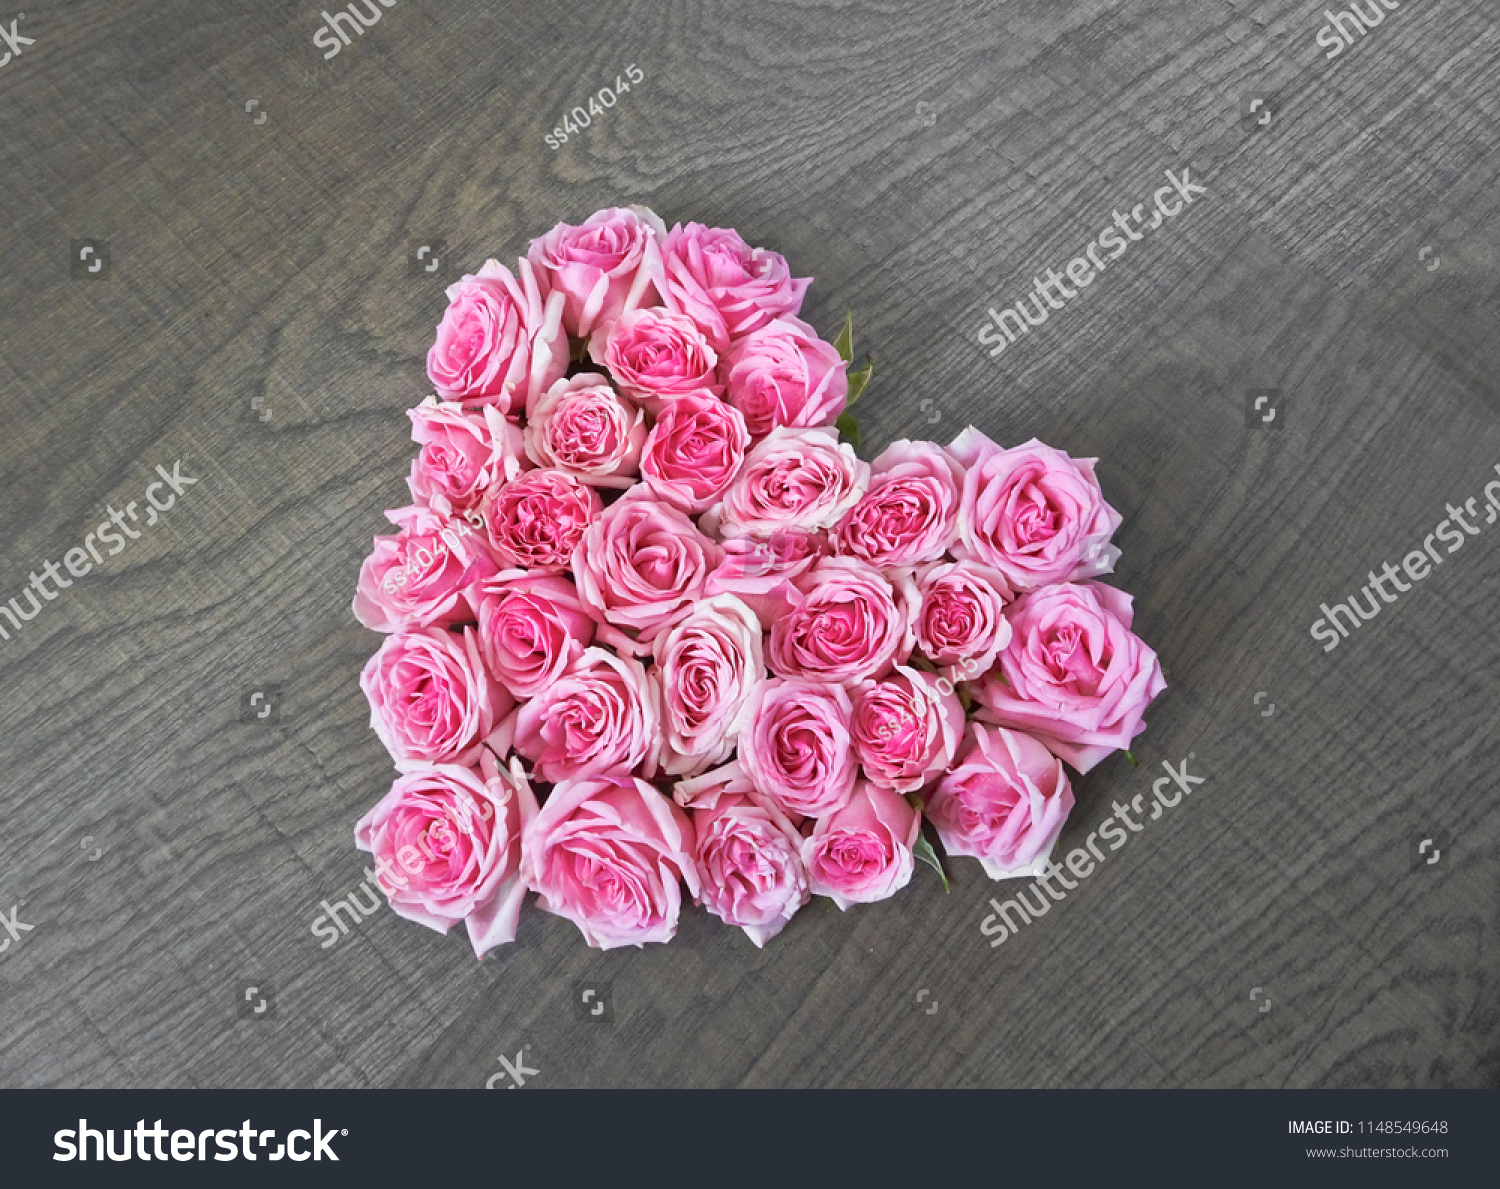 Vintage Heart Pink Rose Against Stock Photo 1148549648